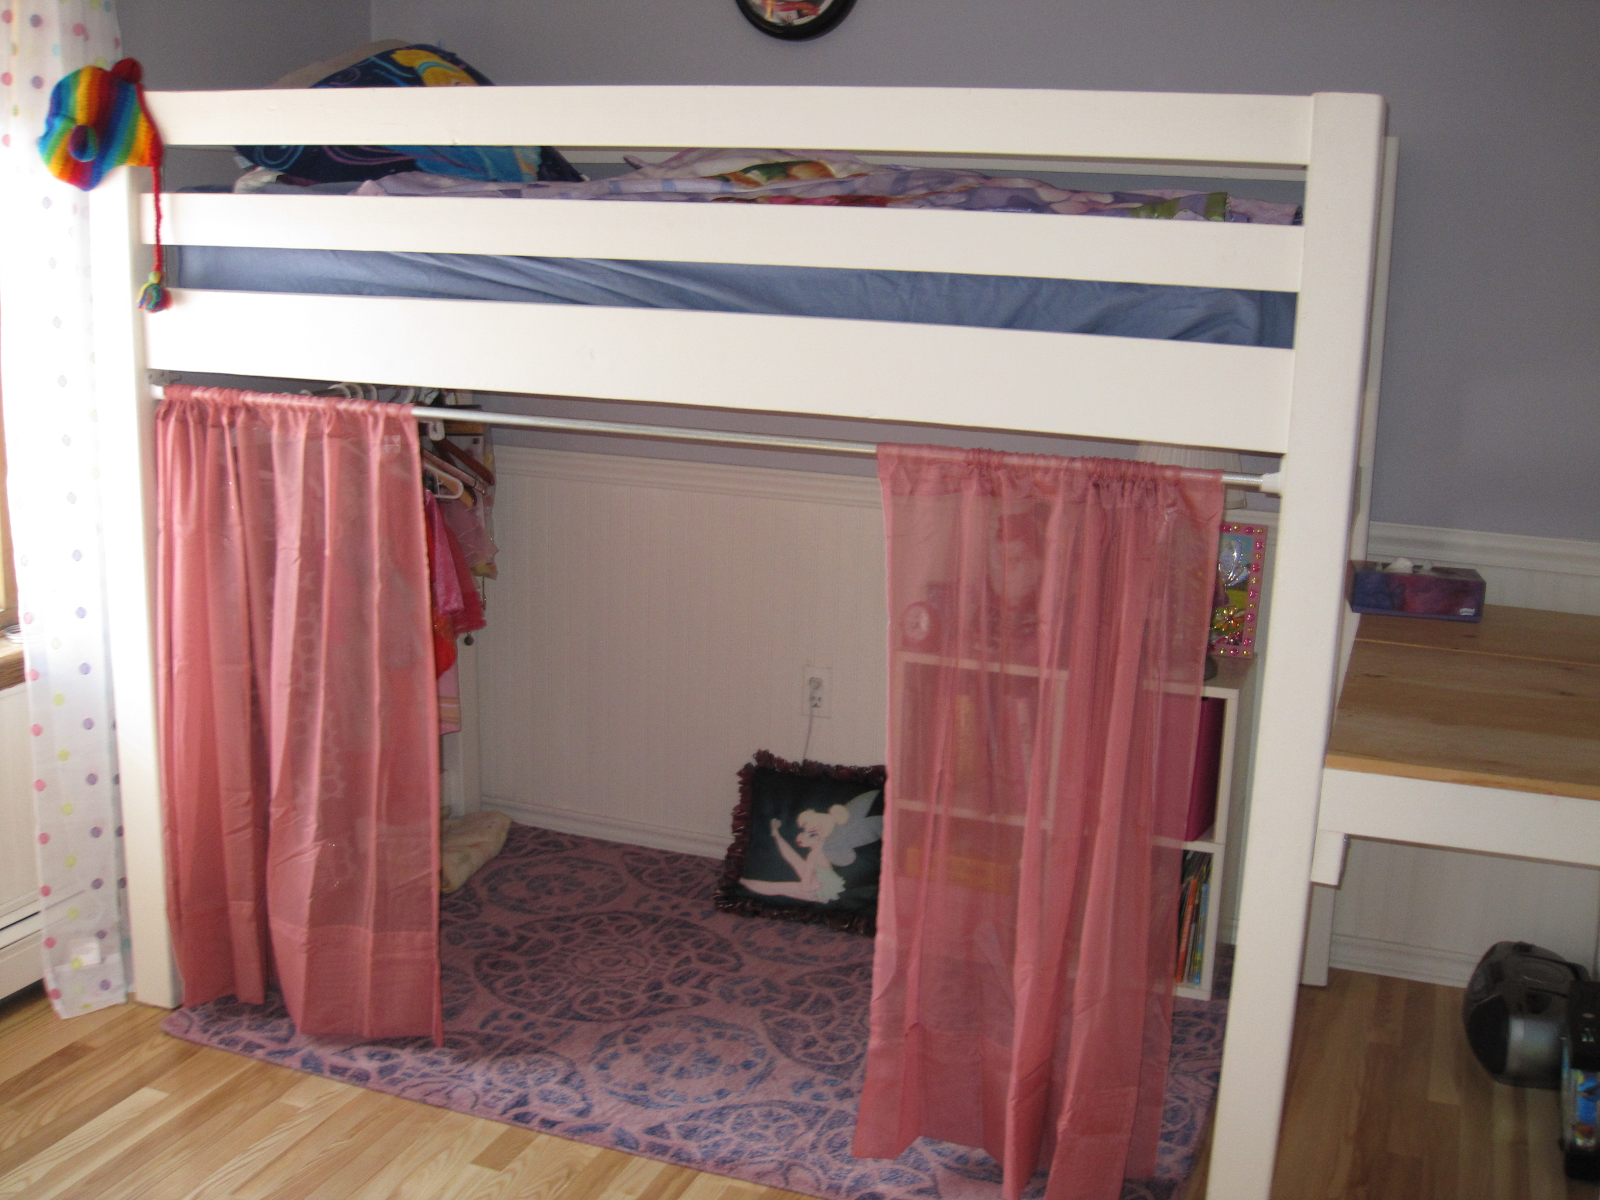 Space Below Your Loft Bed, Bunk Bed With Room Underneath